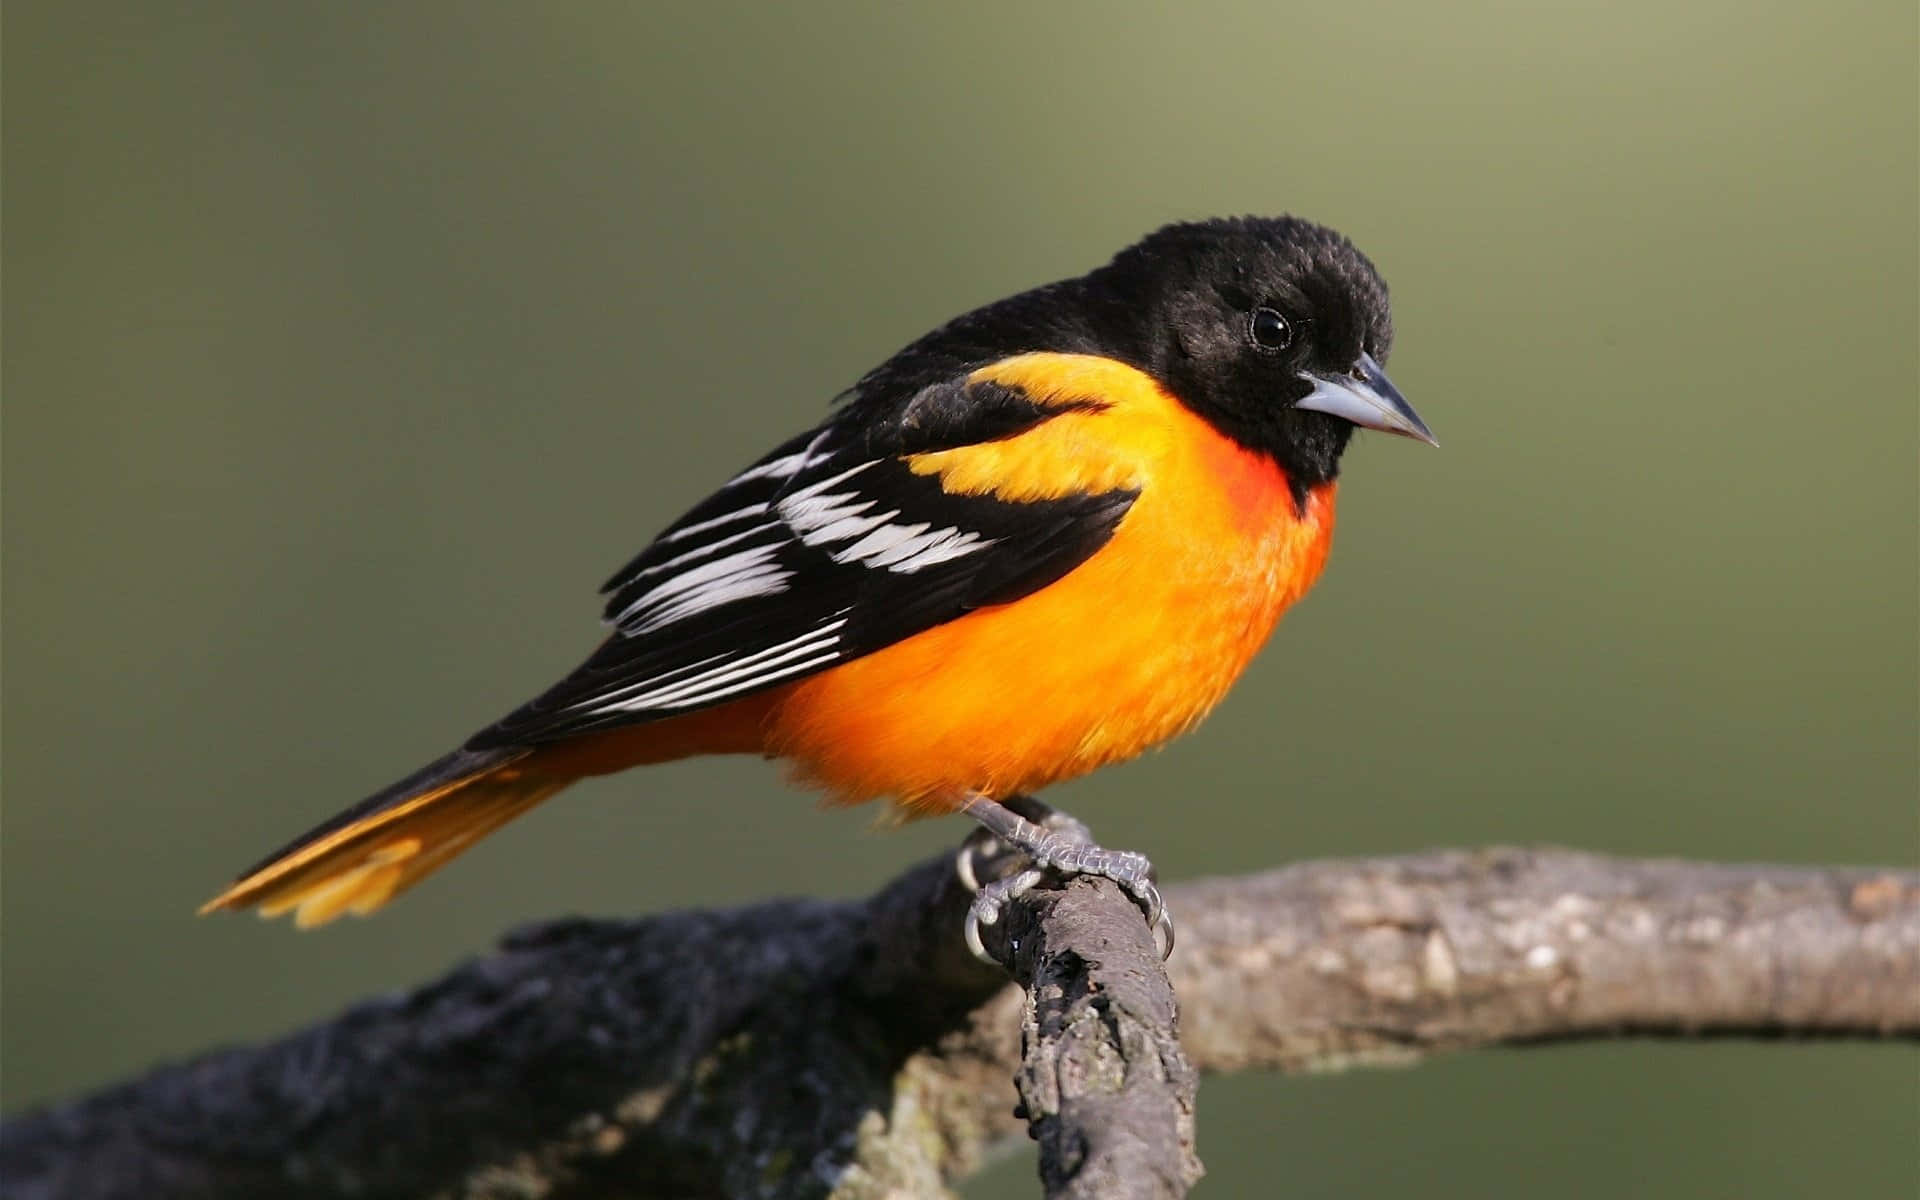 A picture of an Orioles Bird perched on a tree in its natural habitat.